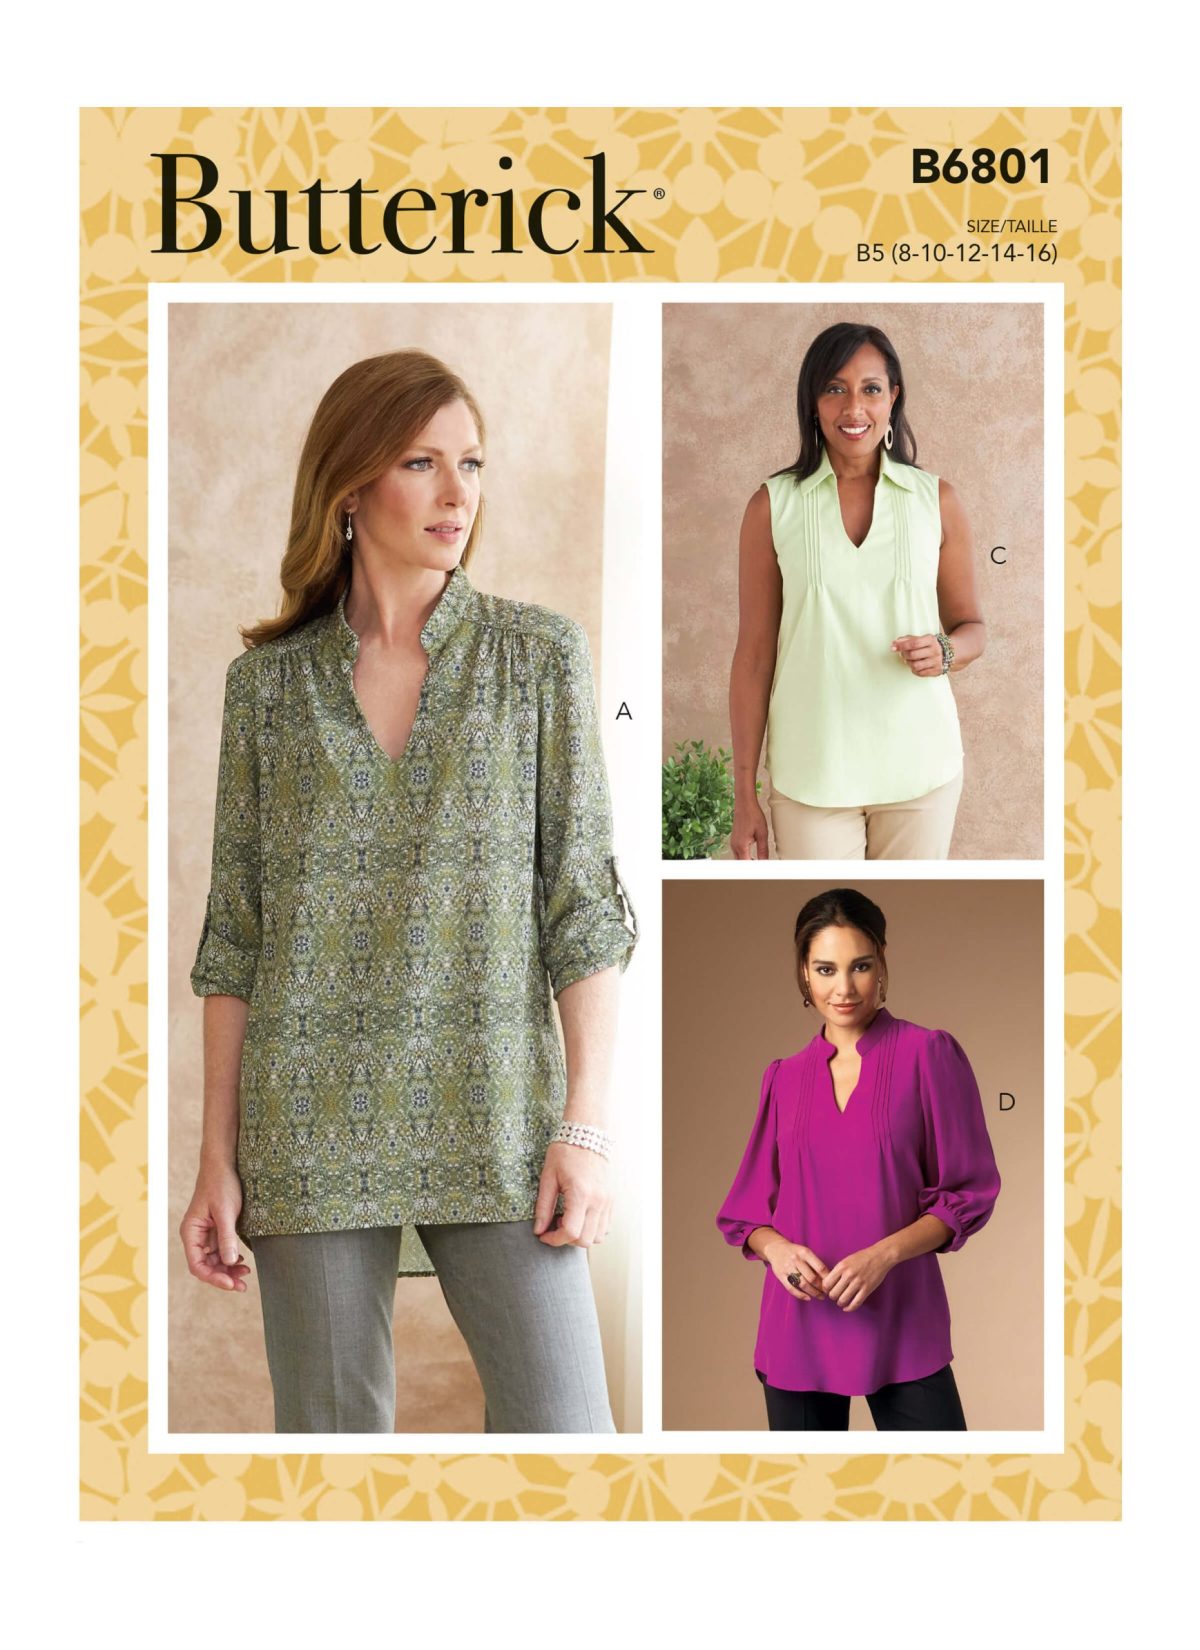 Butterick Sewing Pattern B6801 Misses' and Women's Tucked Or Gathered Top